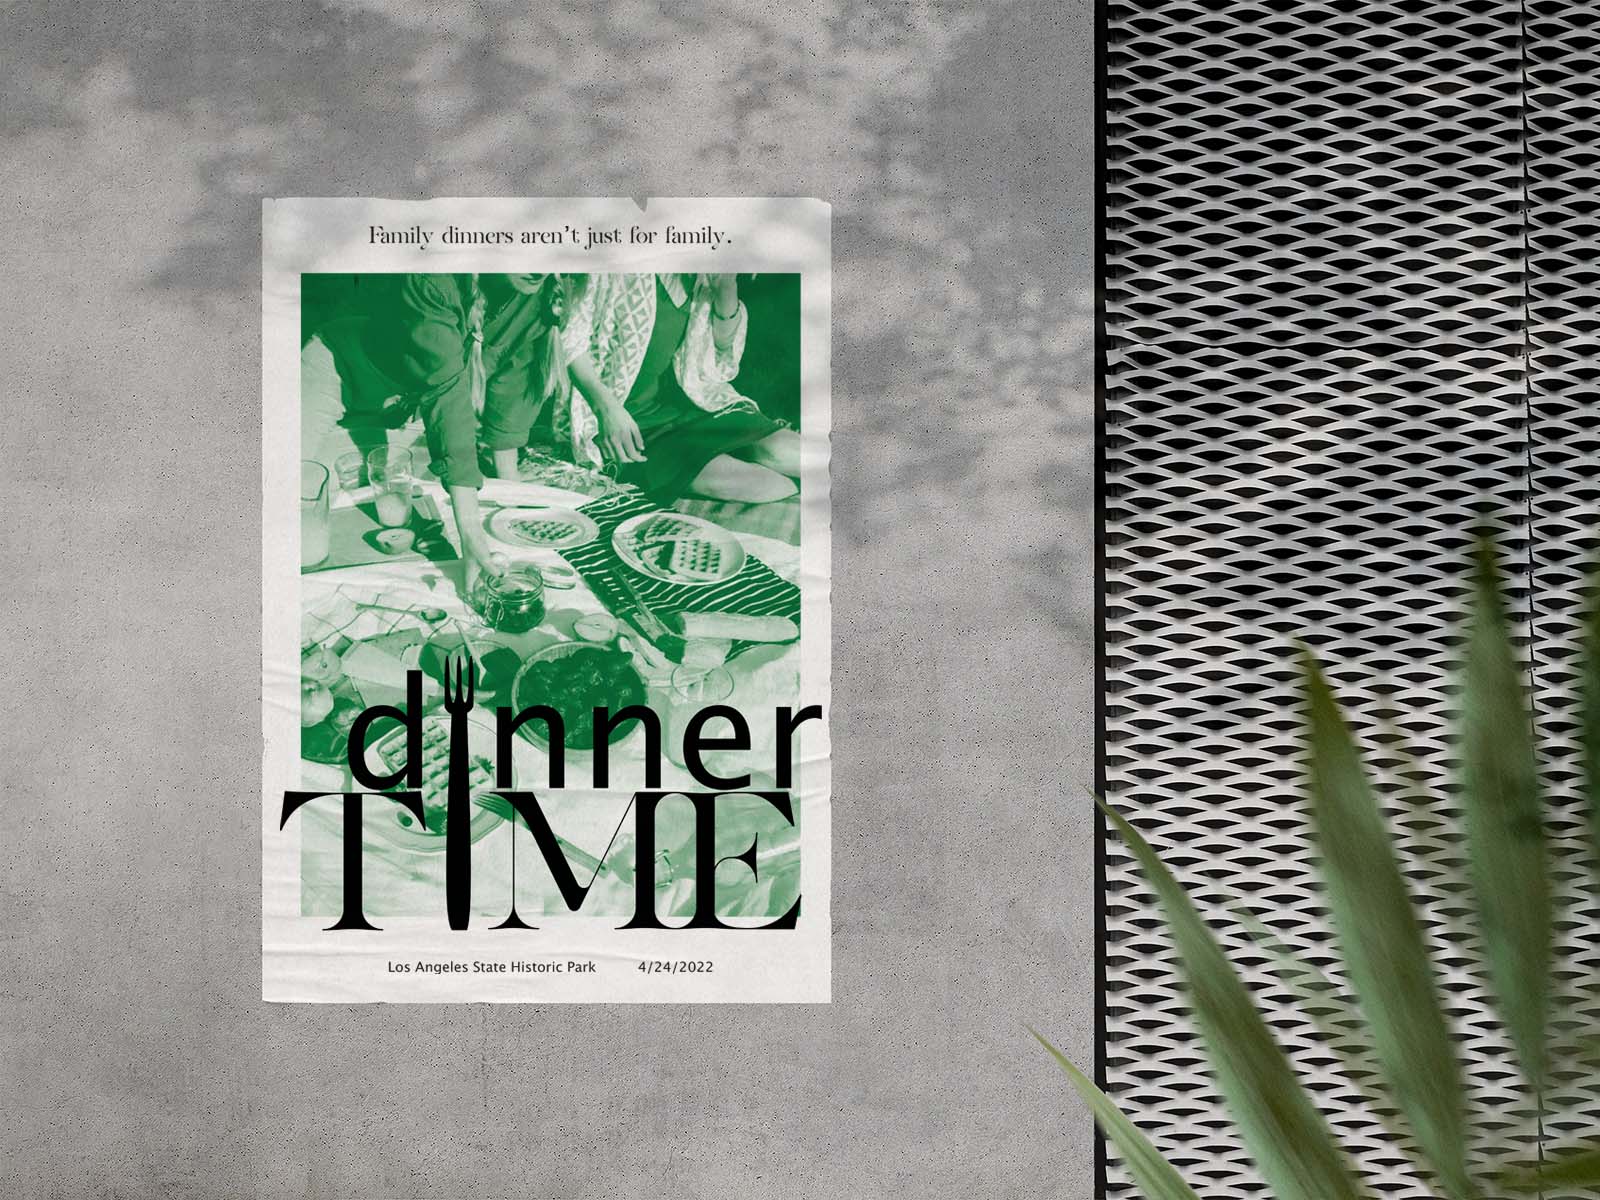 A poster mounted on a concrete wall for a food event titled Dinner Time.